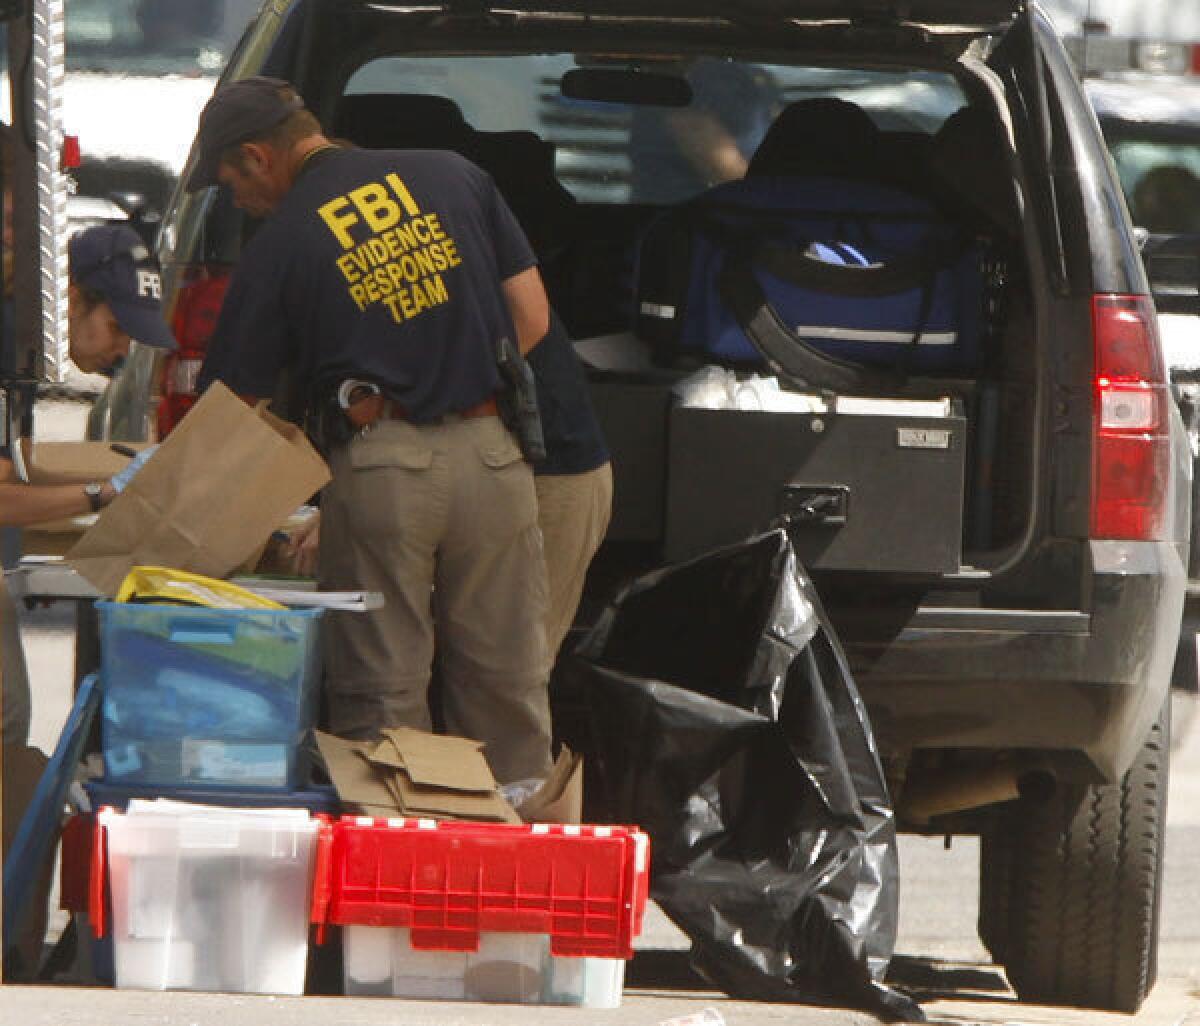 FBI investigators look over some of the items taken from suspect James Holmes' apartment in Aurora, Colo.